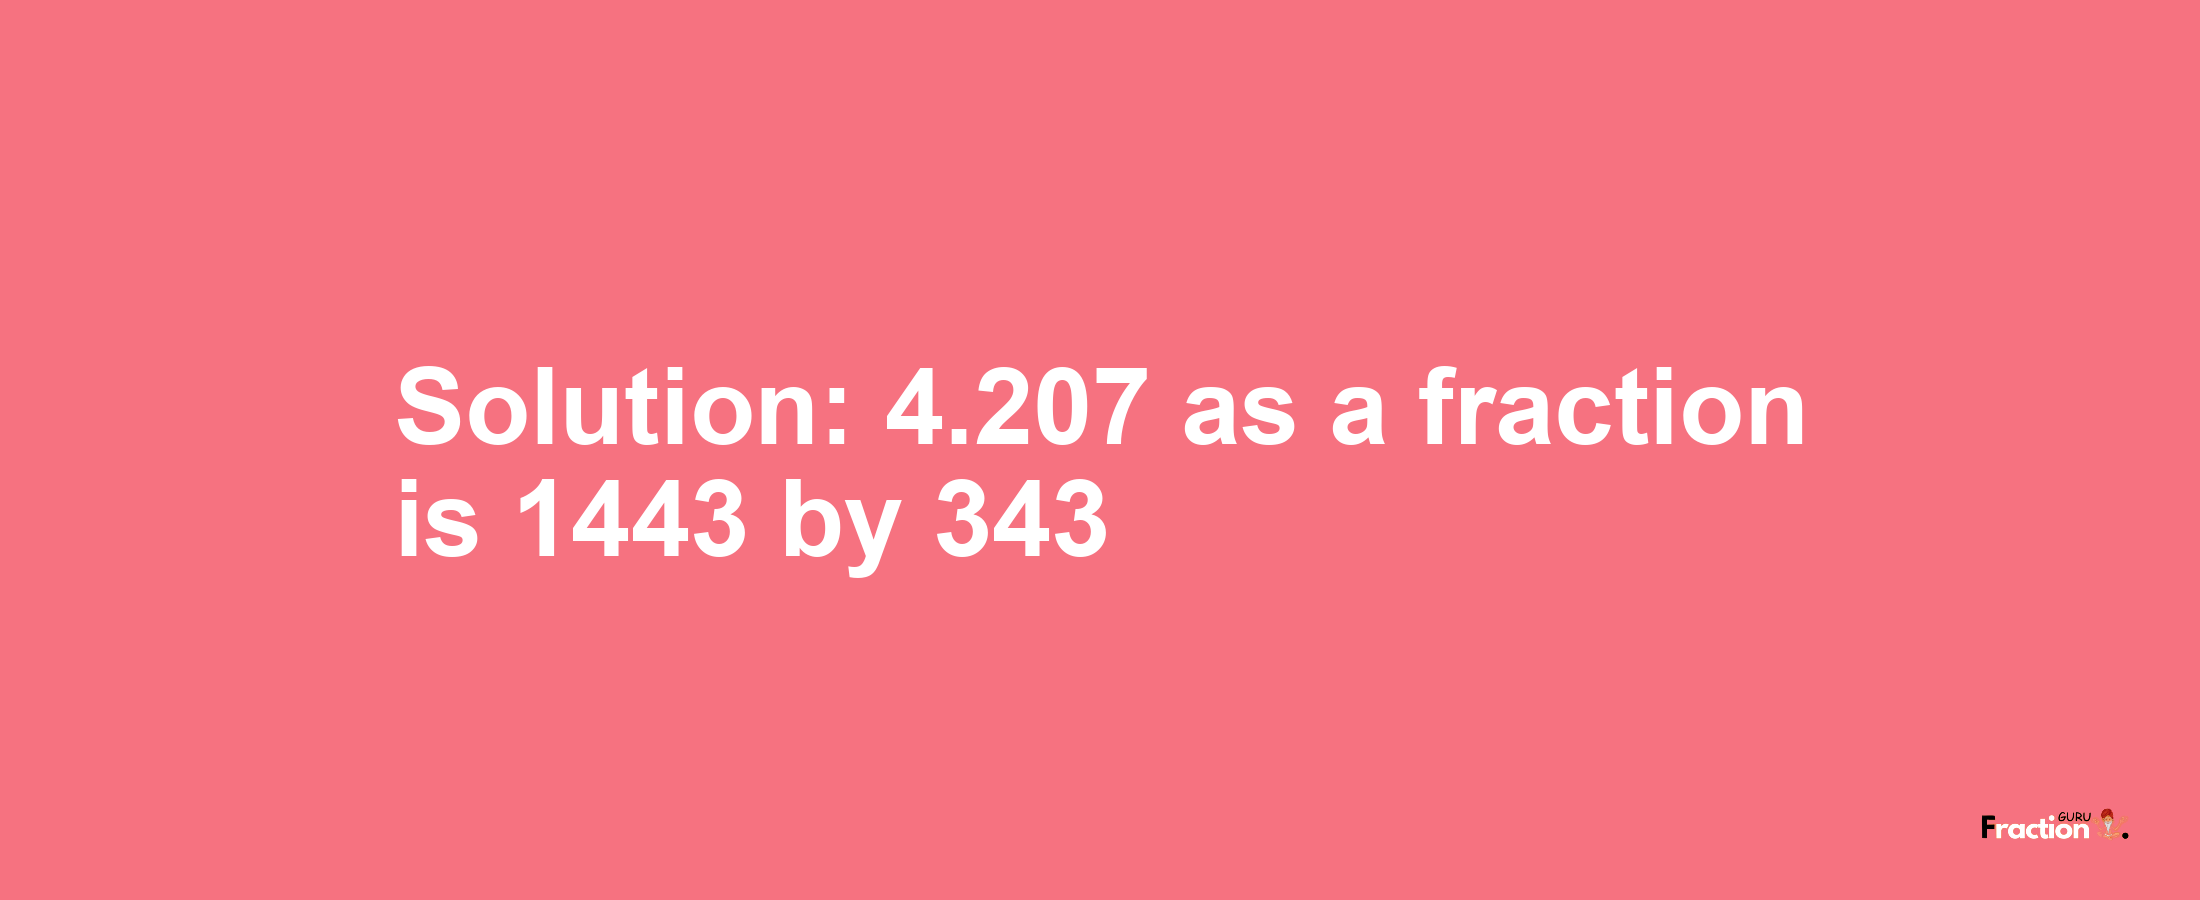 Solution:4.207 as a fraction is 1443/343